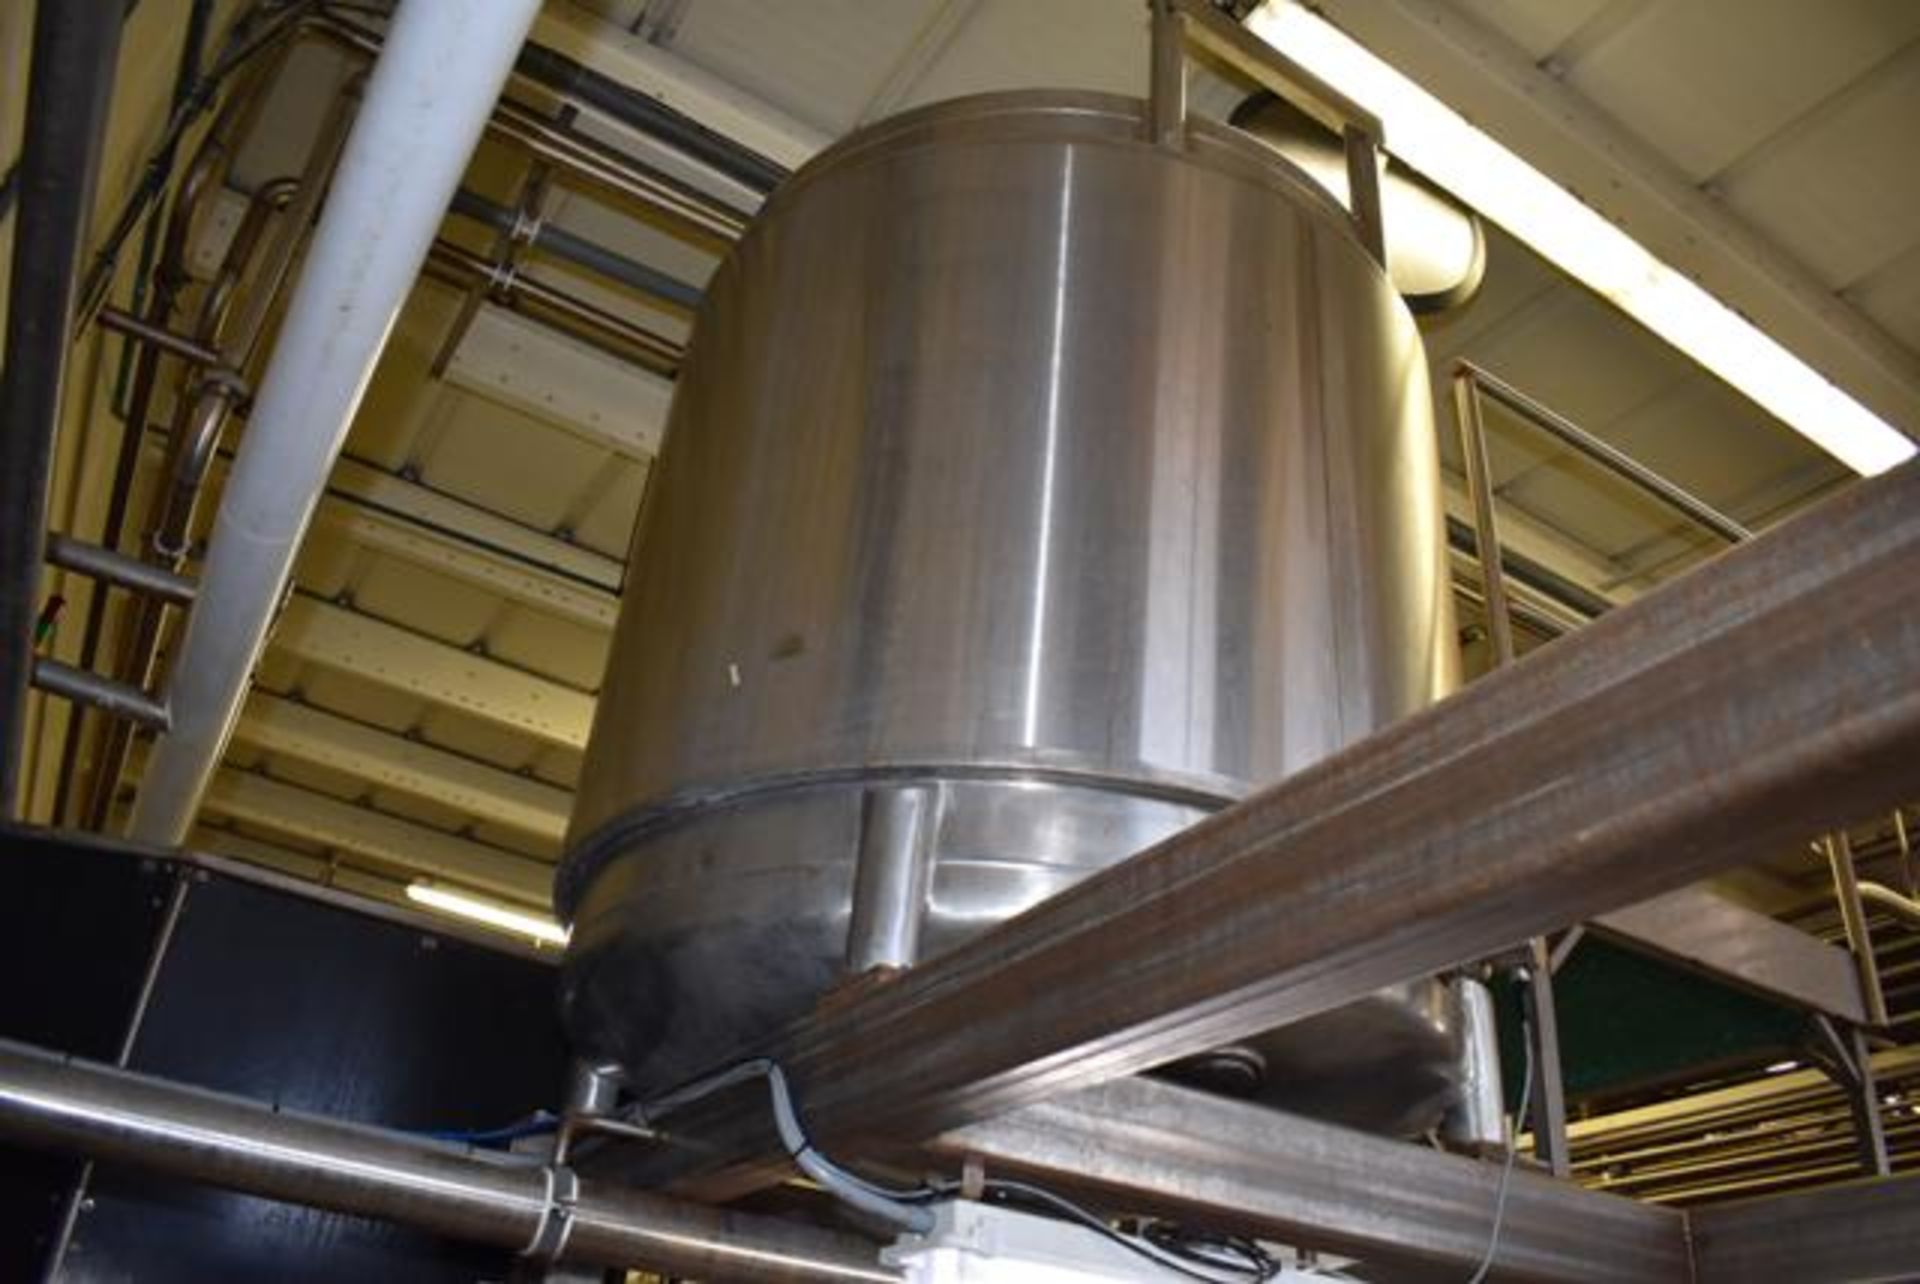 Stainless Steel Insulated Tank, Rated 600 Gal., 56" x 60" - Image 5 of 6